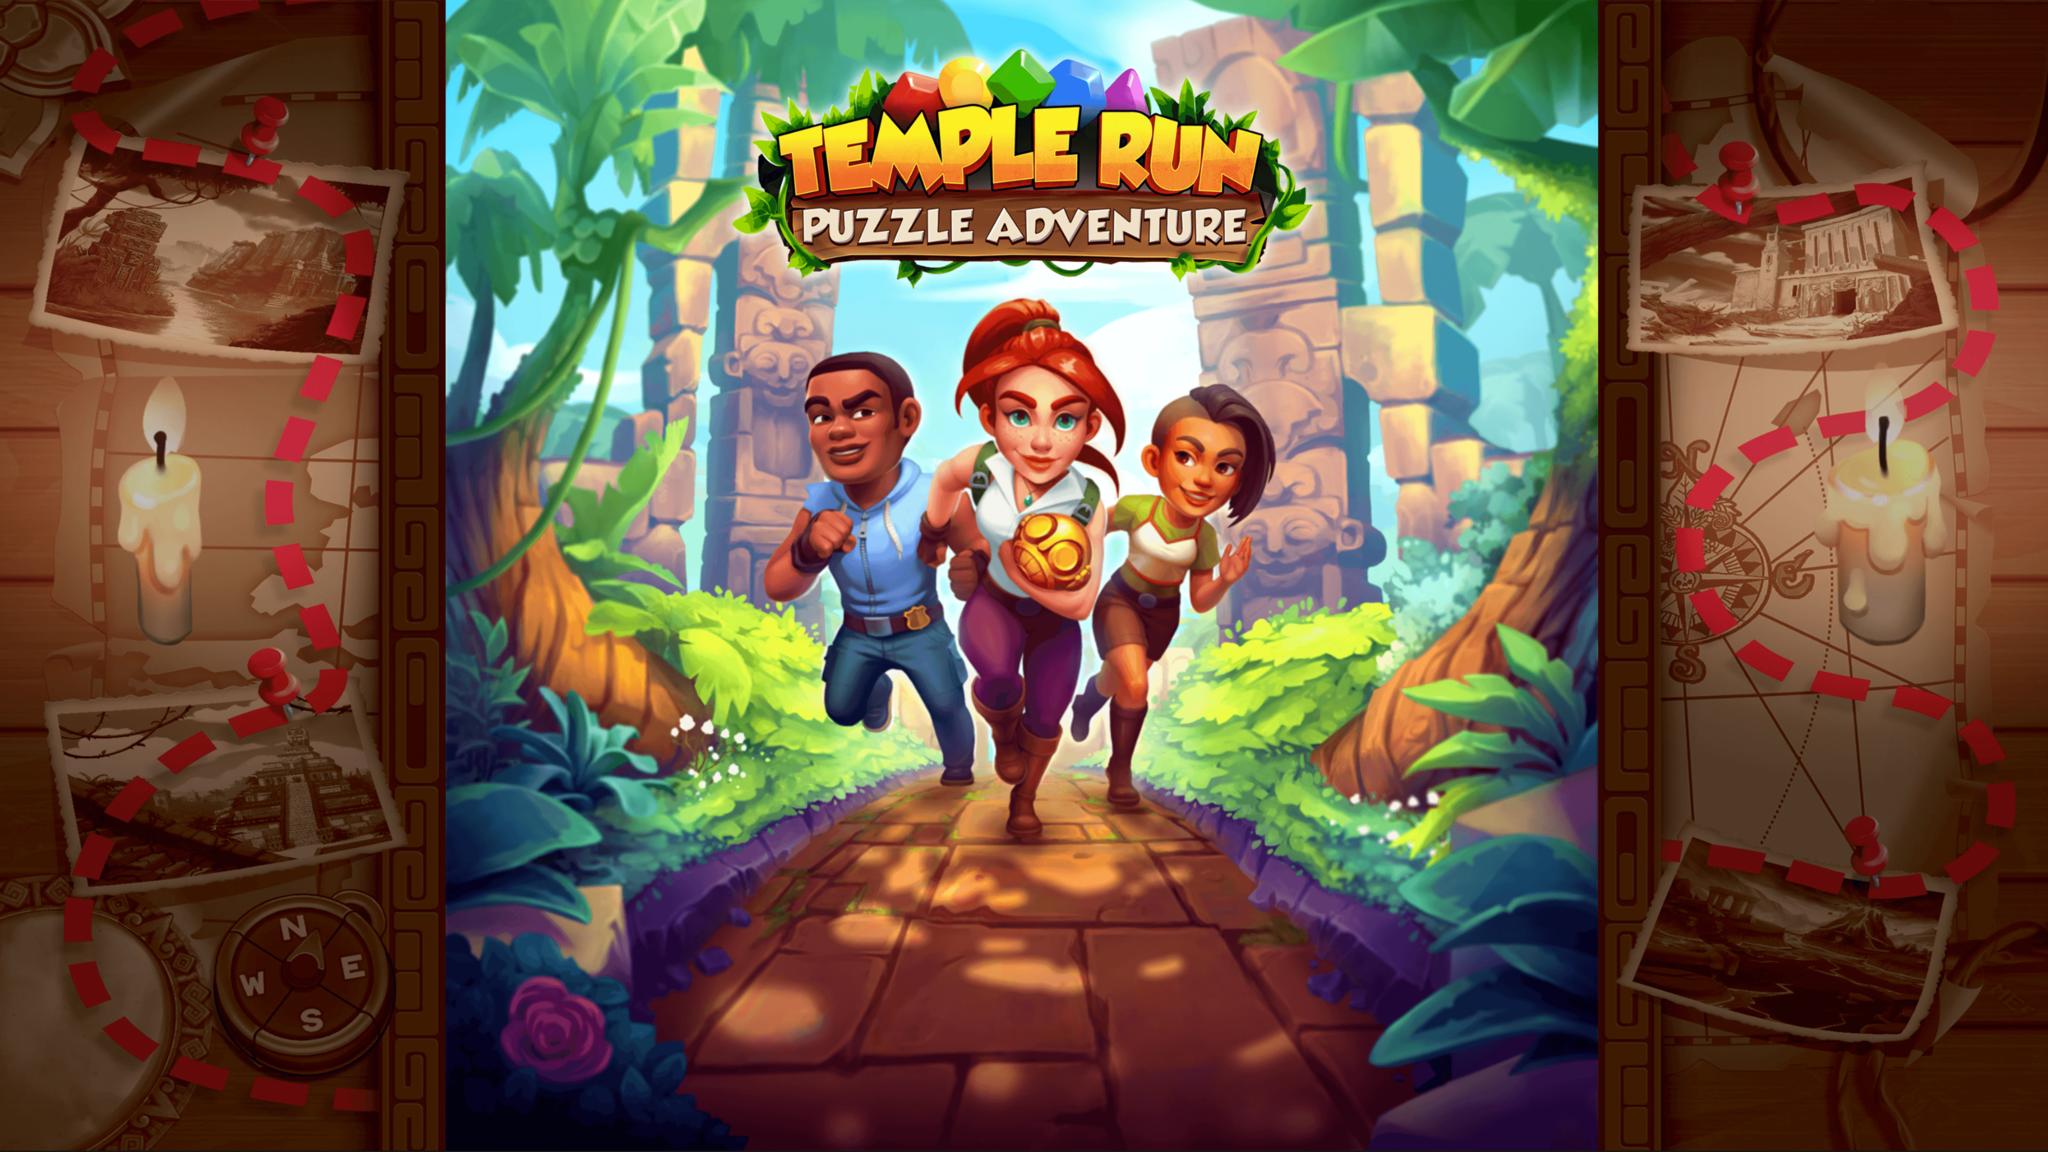 Temple Run - Temple Run updated their cover photo.